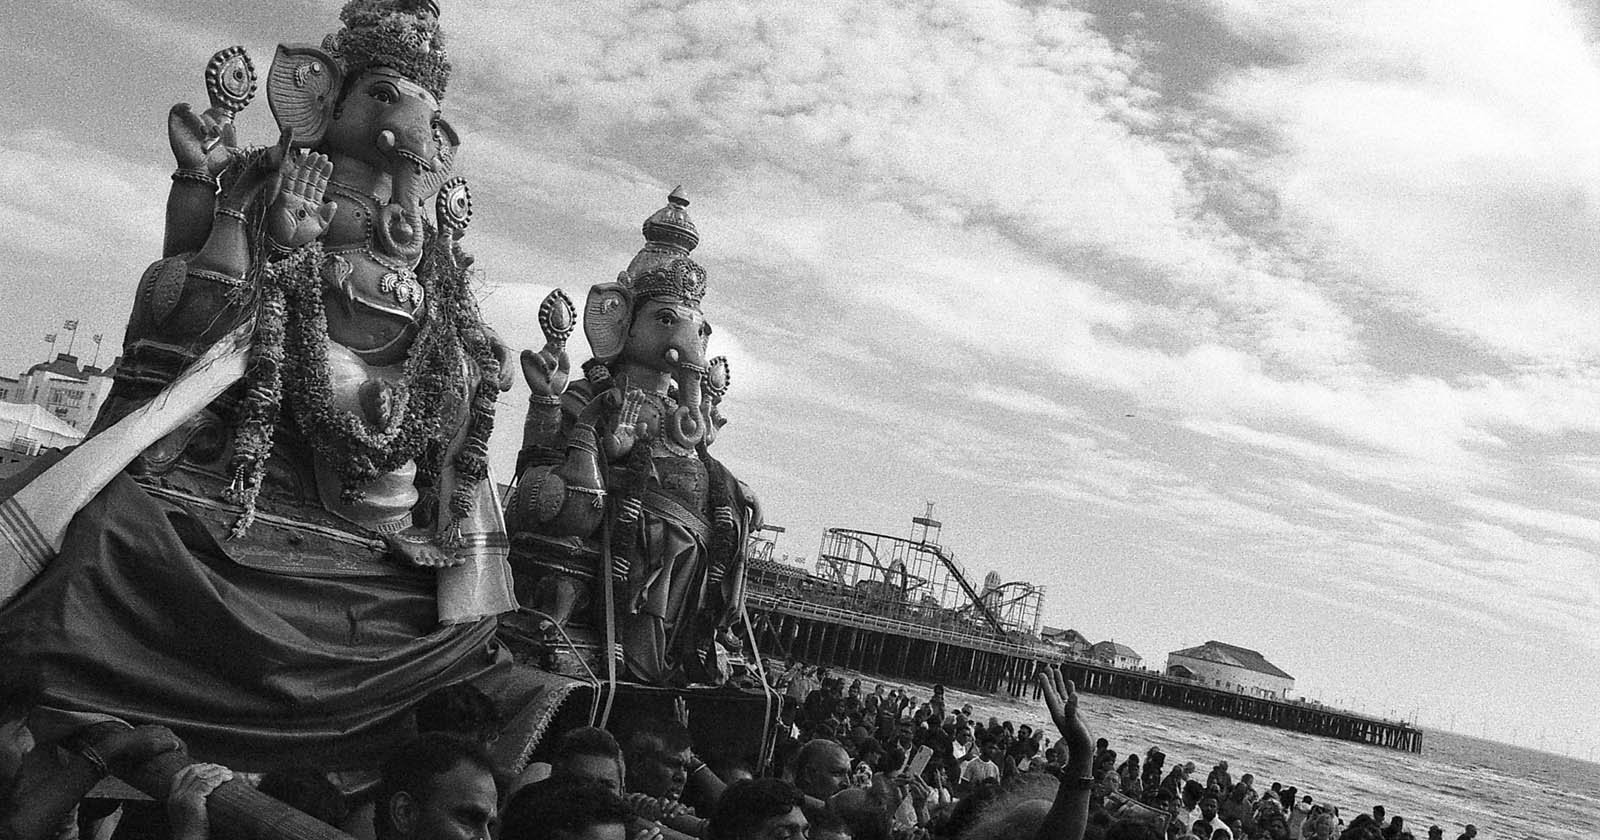 Photographing a Hindu Sea Procession at an Iconic British Seaside Town